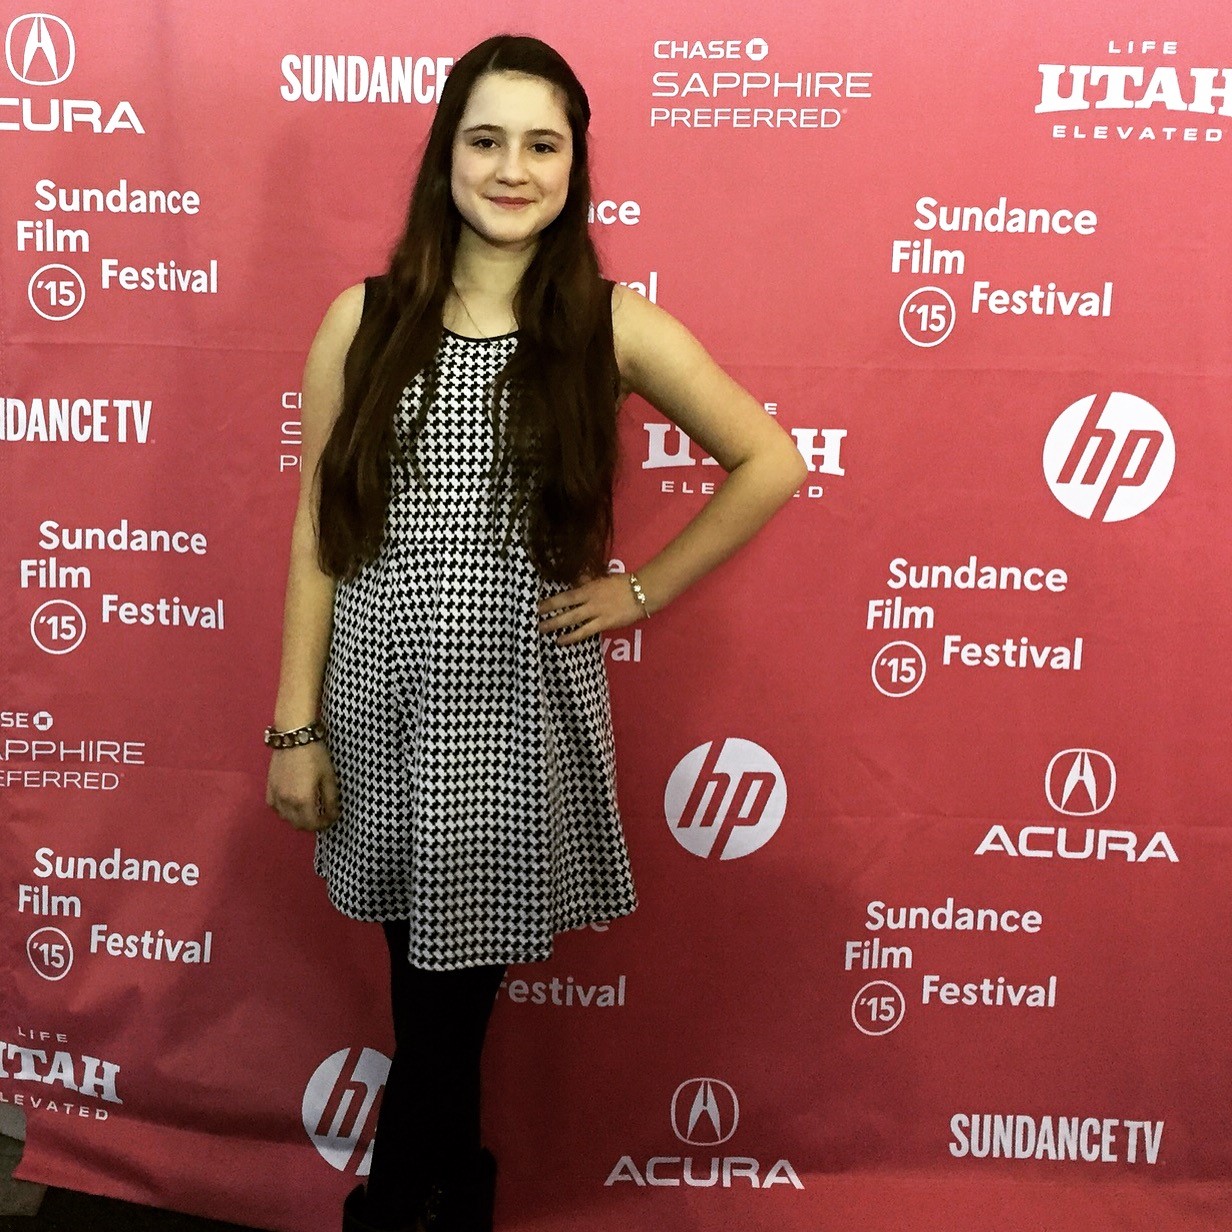 Ariana Altman at the world premiere for Advantageous at Sundance Film Festival on January 26th, 2015